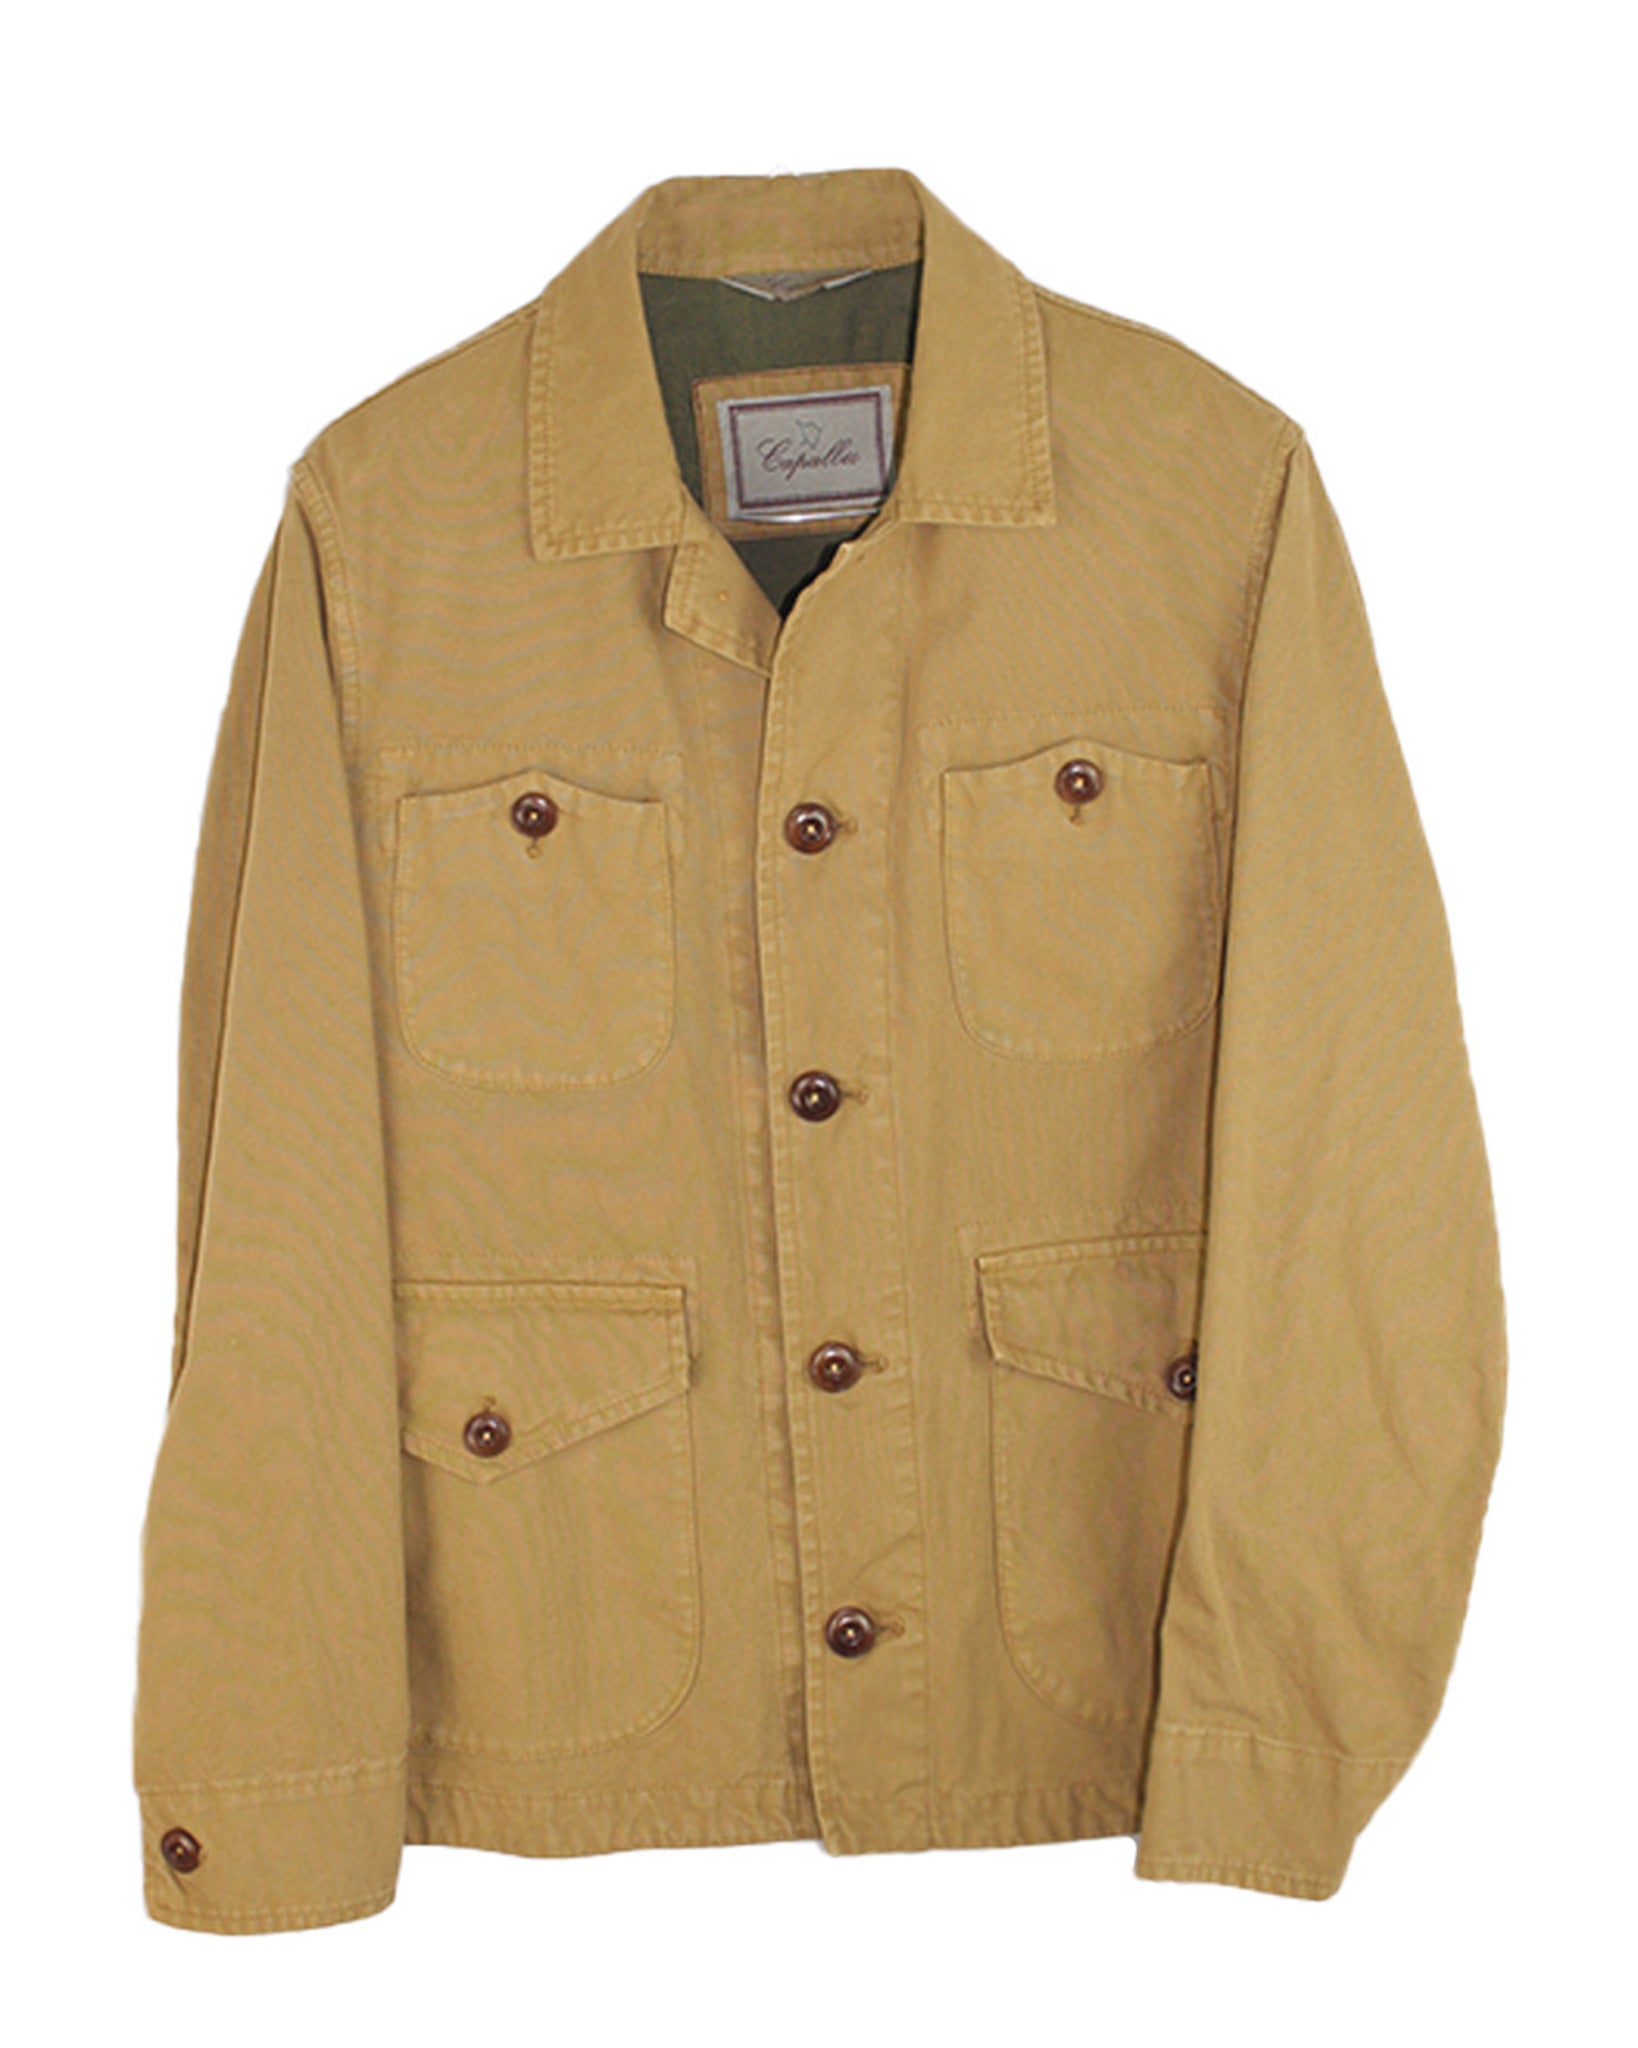 OVERSHIRT IN CANVASS COTTON CANVAS